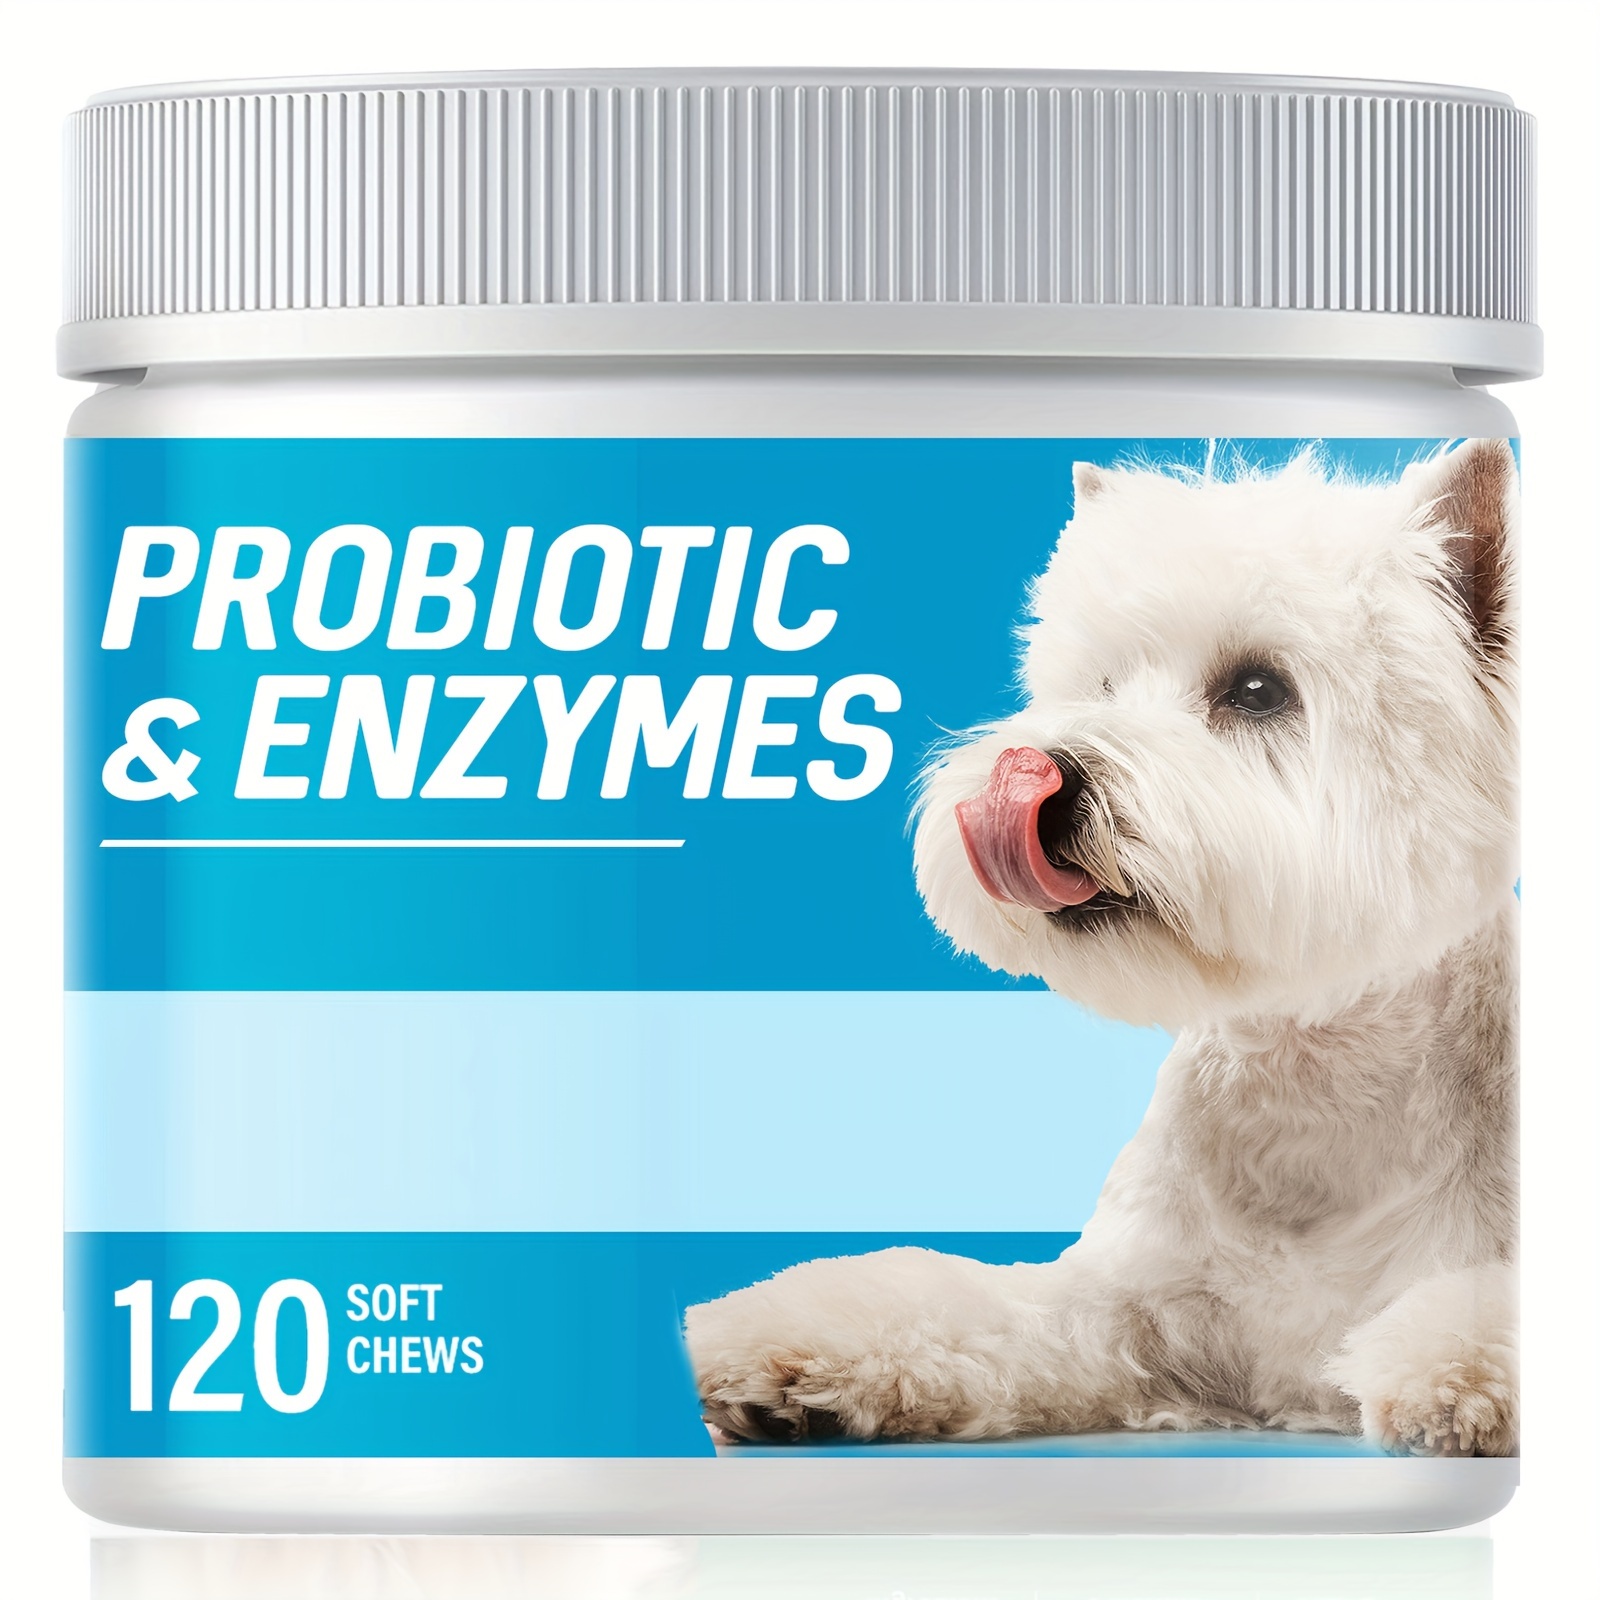 

Probiotics For Dogs - Dog Probiotics And Digestive Enzymes For Health - 120 Probiotic